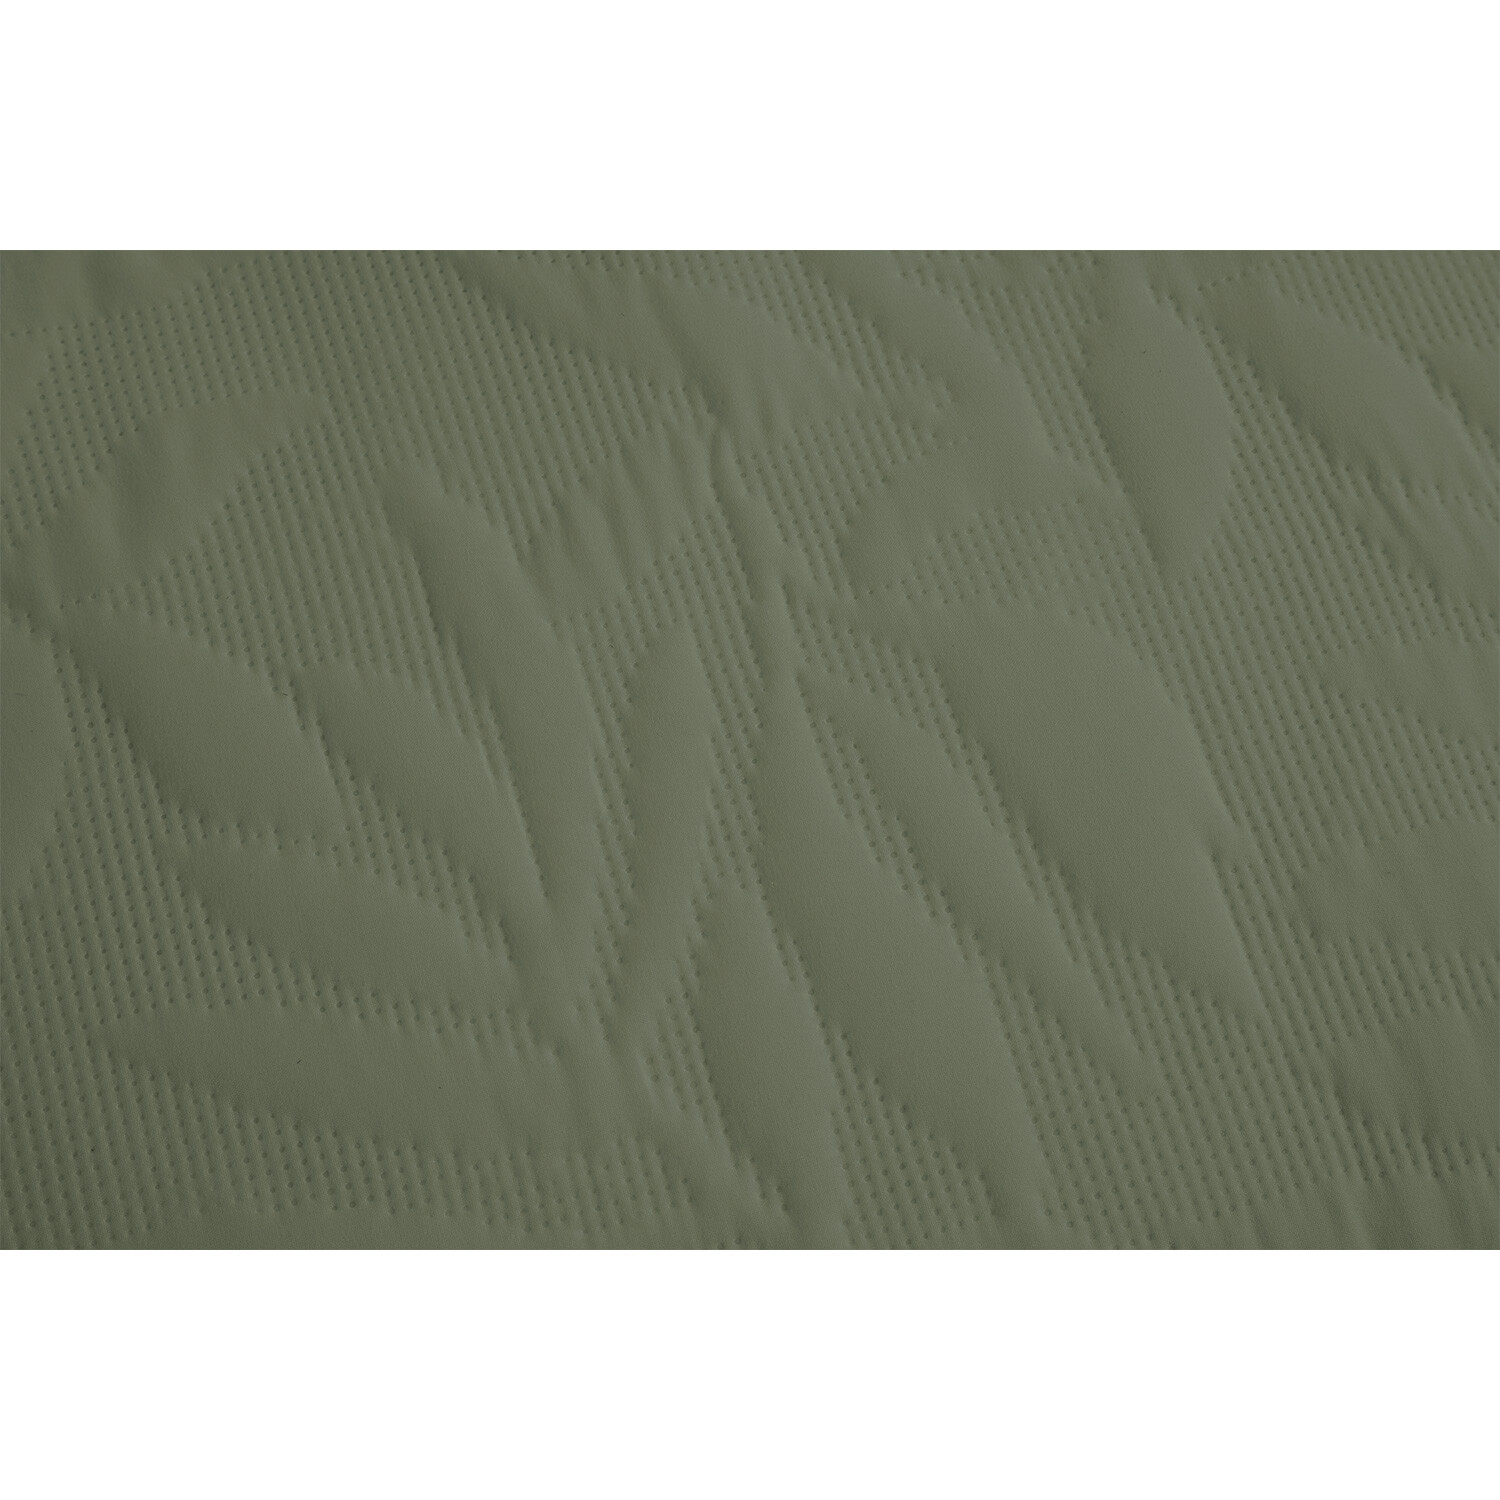 Avery Leaf Duvet Cover and Pillowcase Set - Olive Green / Superking Image 4